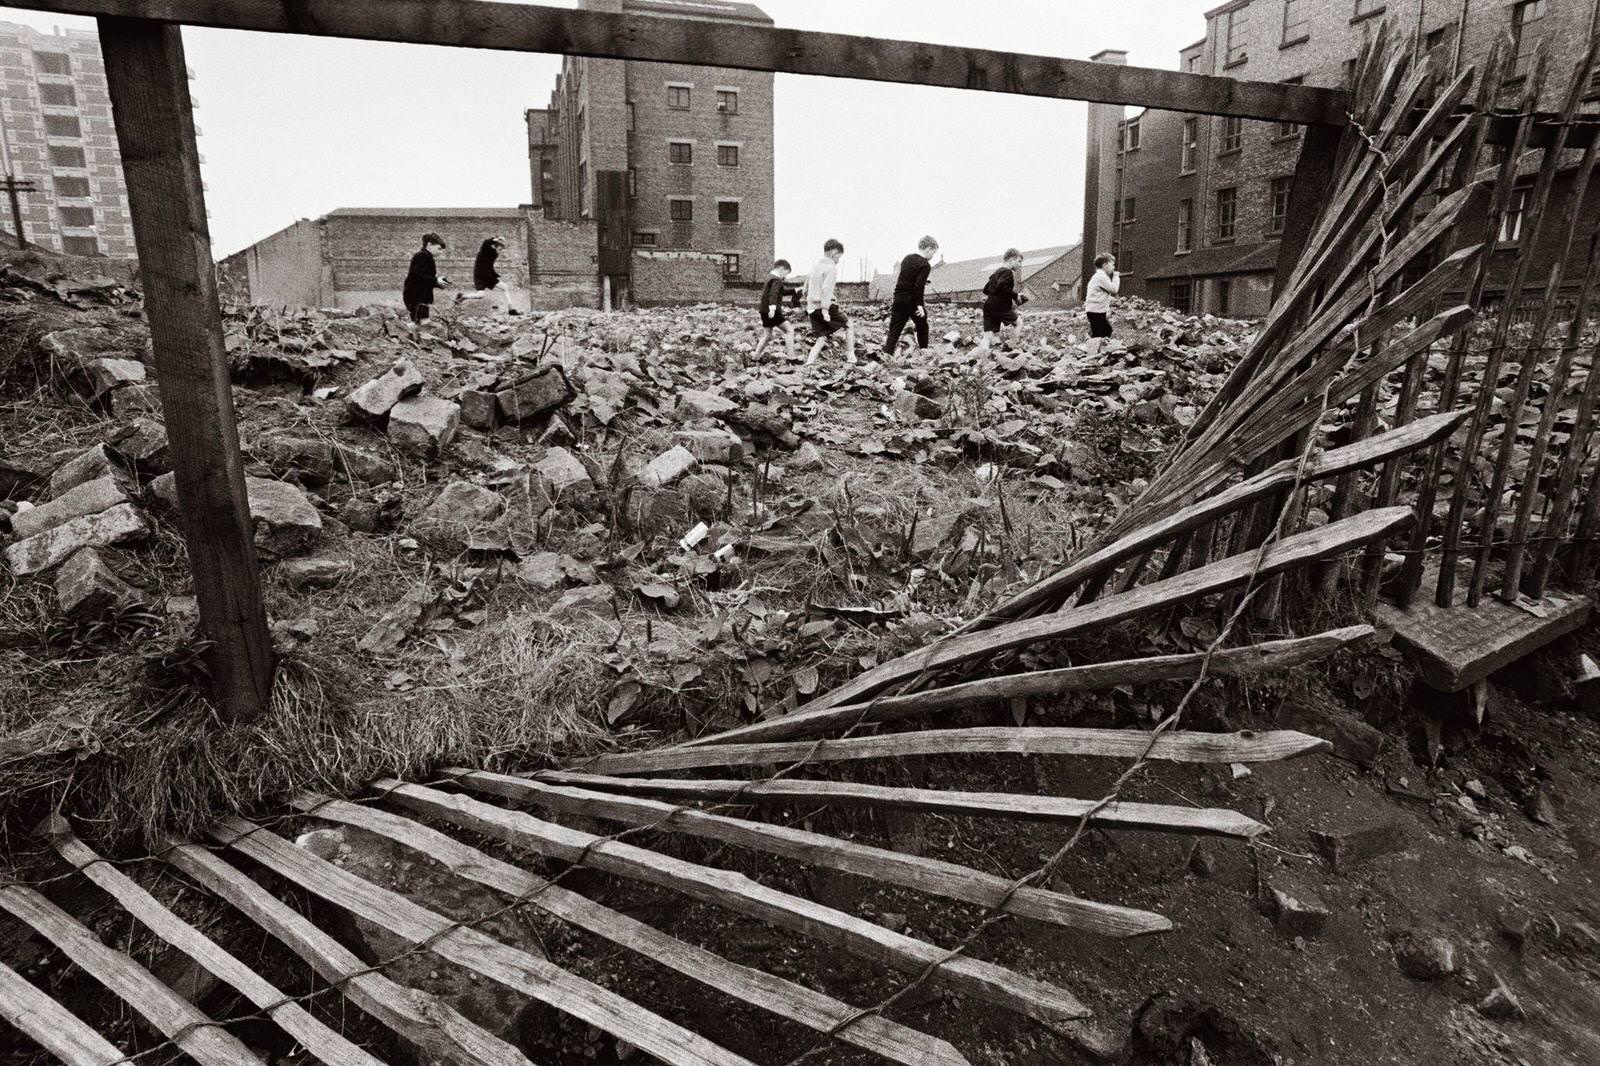 A group of boys pick their way through a wasteland in the Gorbals area of Glasgow, 1968.